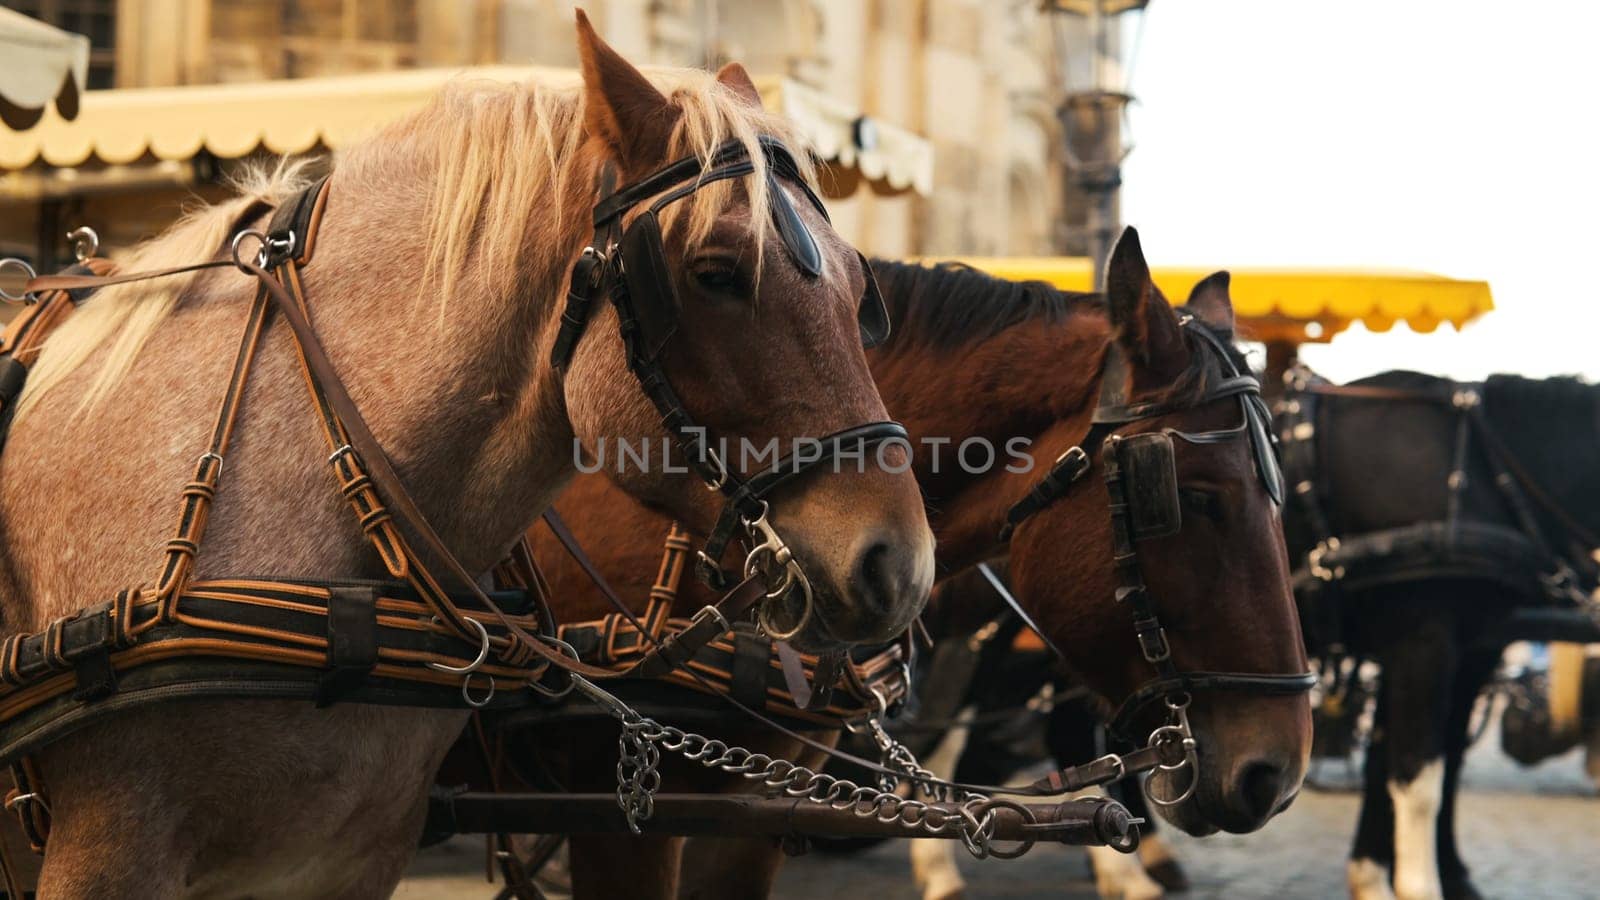 Horses In An Old City Center In Europe Provide Entertainment For Tourists